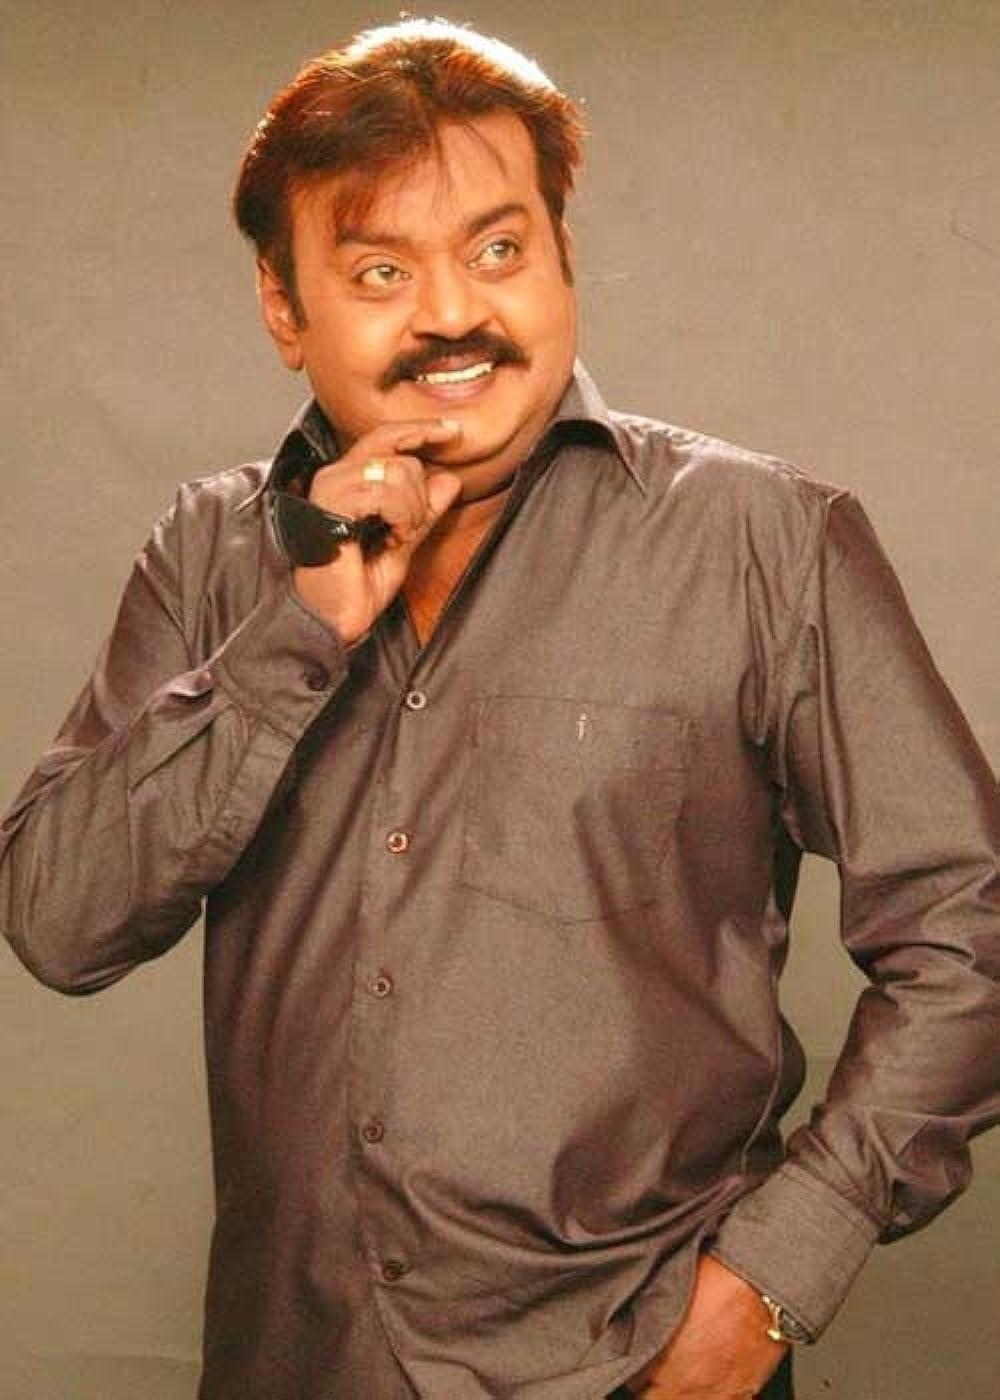 Before venturing into the political arena, Vijayakanth had an illustrious career in the entertainment industry. He was a successful actor, producer, and director, starring in a total of 154 movies.